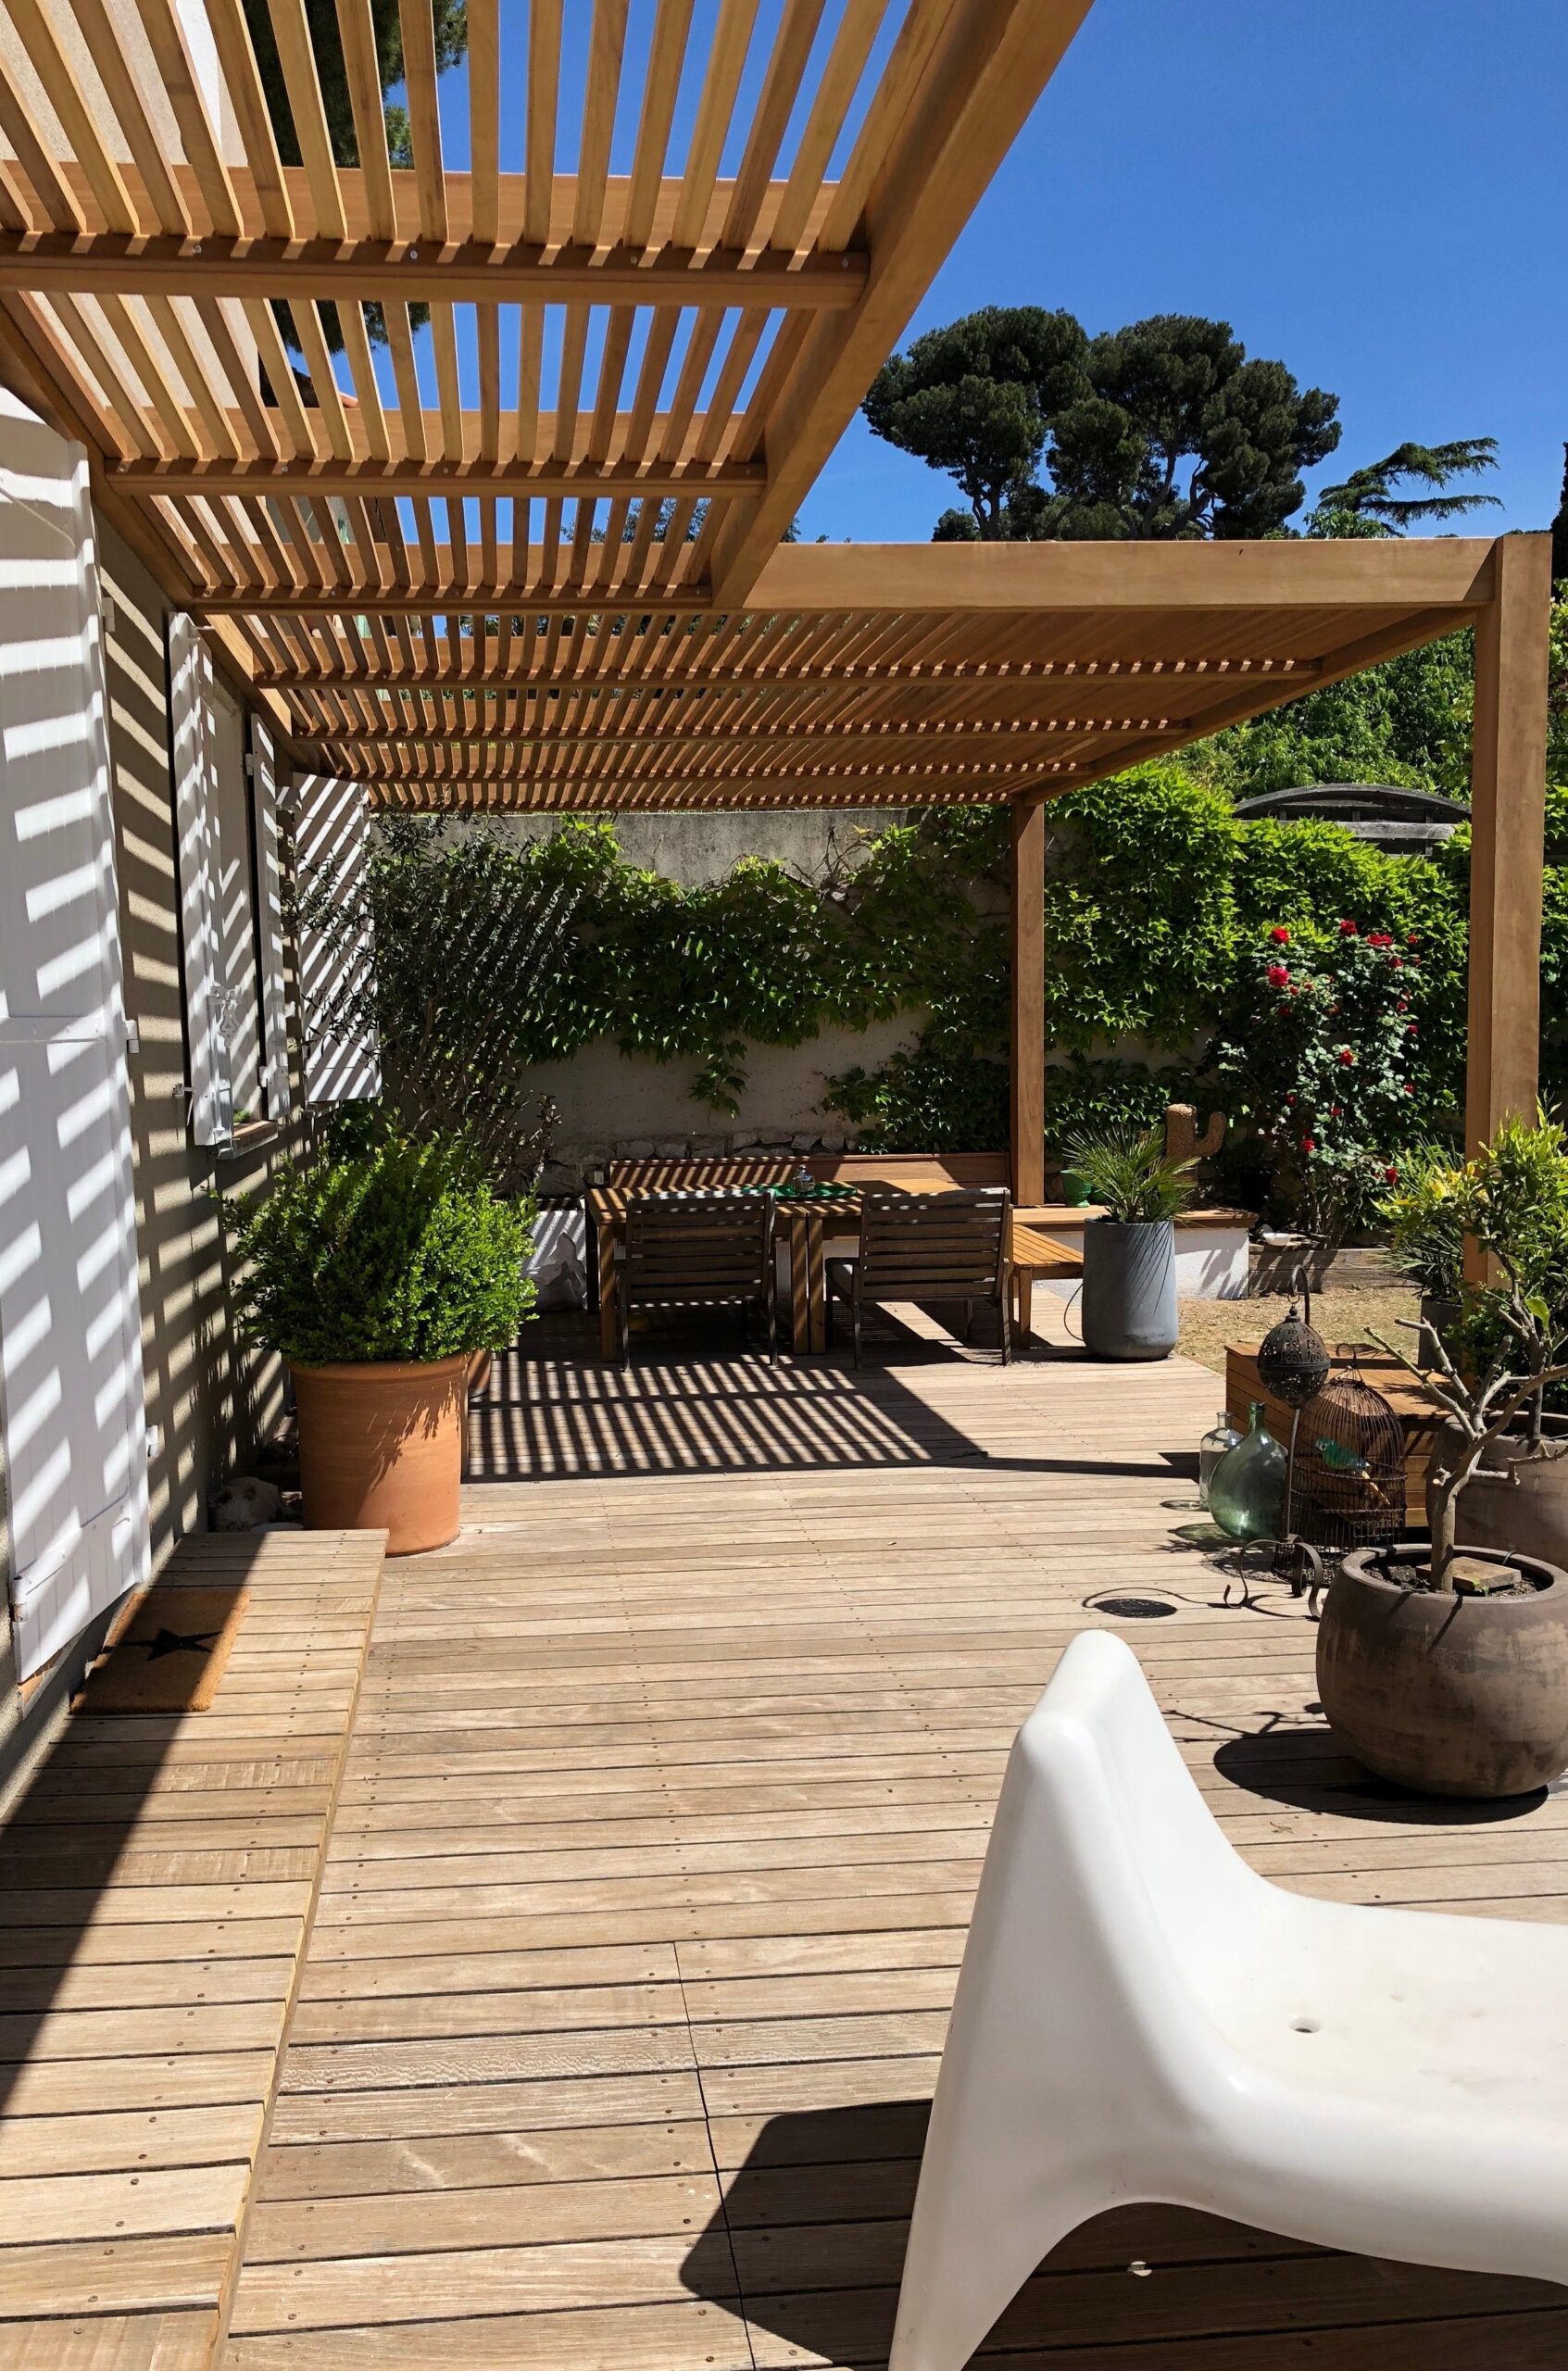 Pergola Design Transform Your Outdoor Space with Stylish and Functional Pergolas